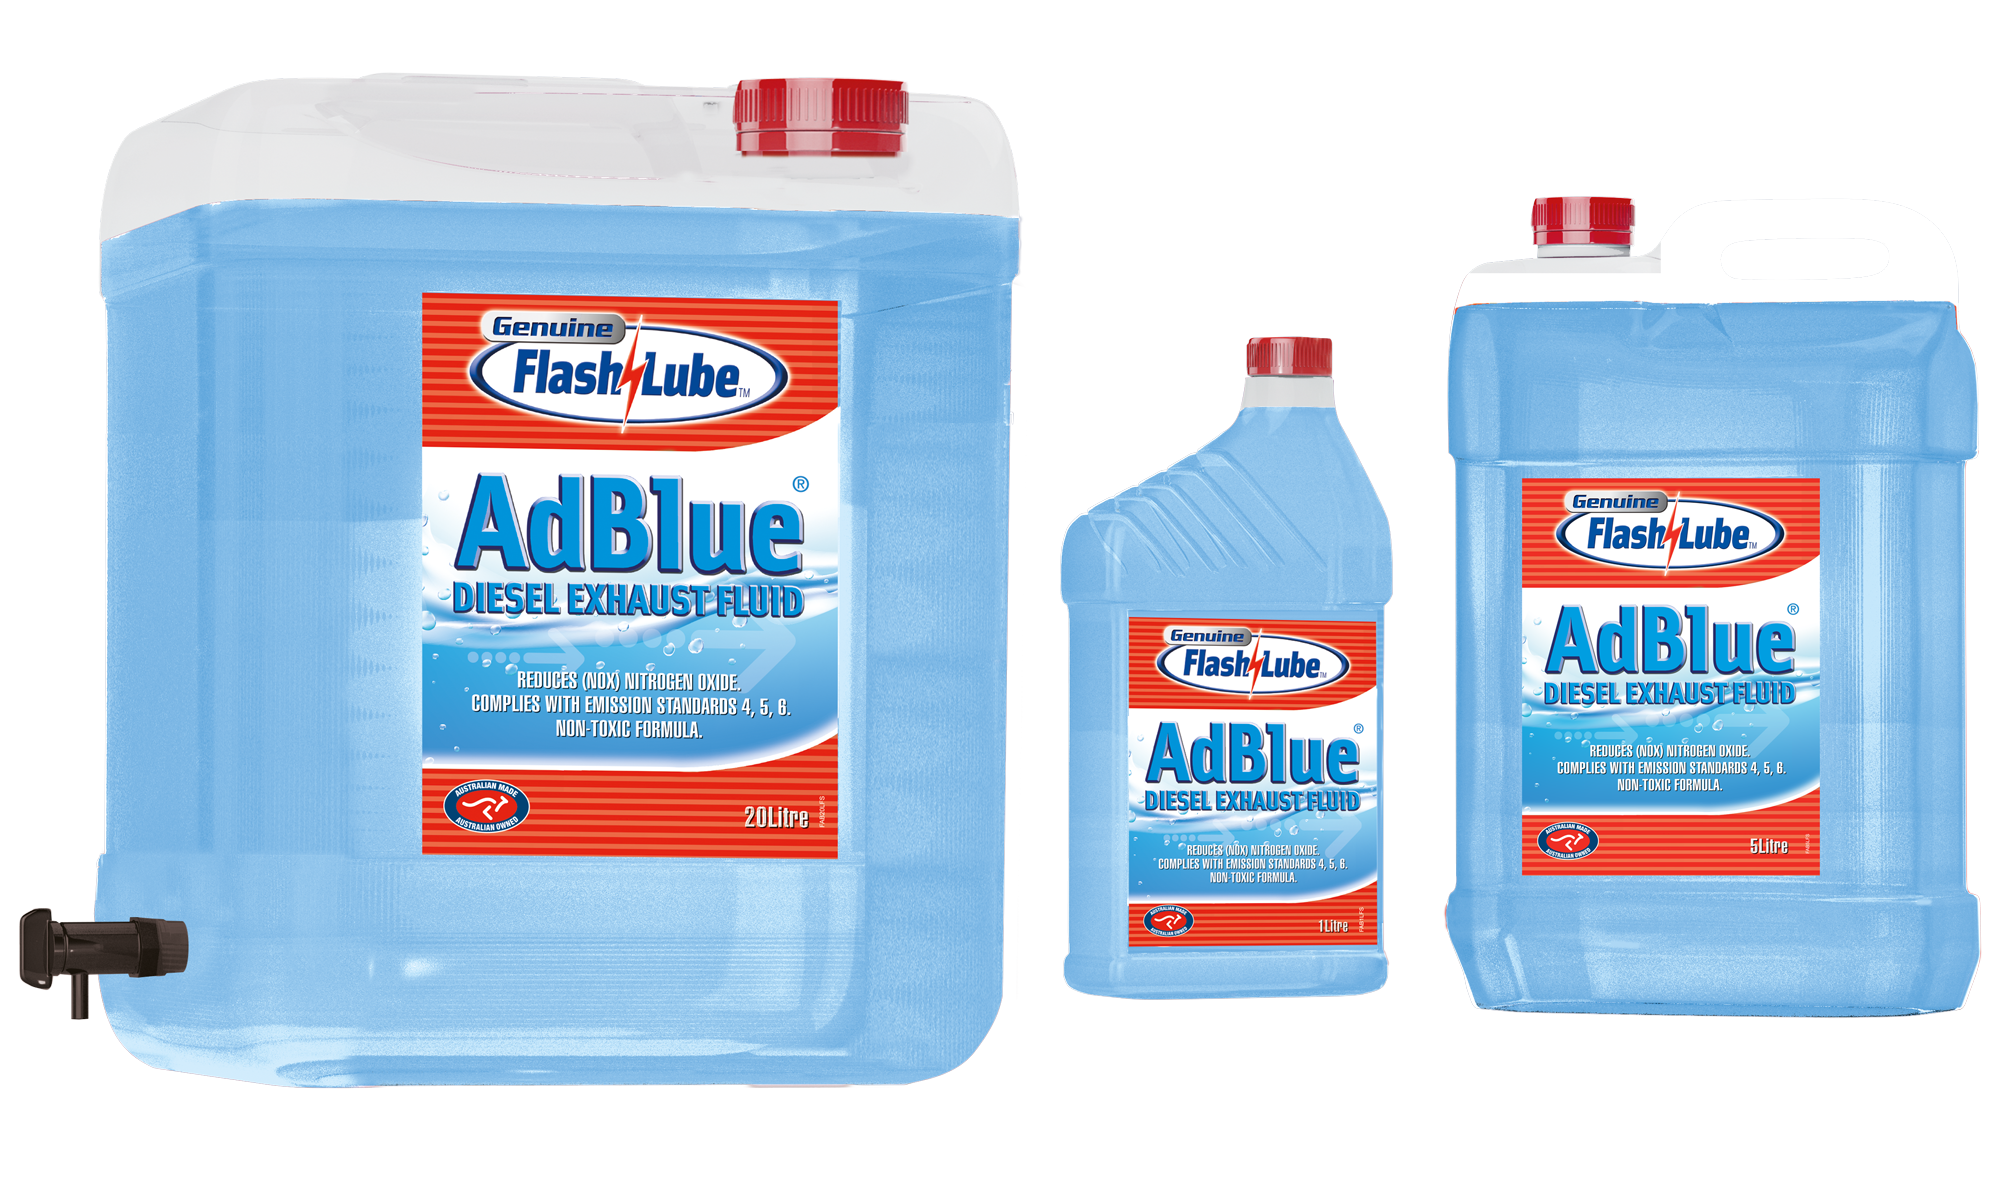 Flashlube AdBlue DEF - Genuine Flashlube™ fuel additives Synthetic  lubricants for the automotive industry